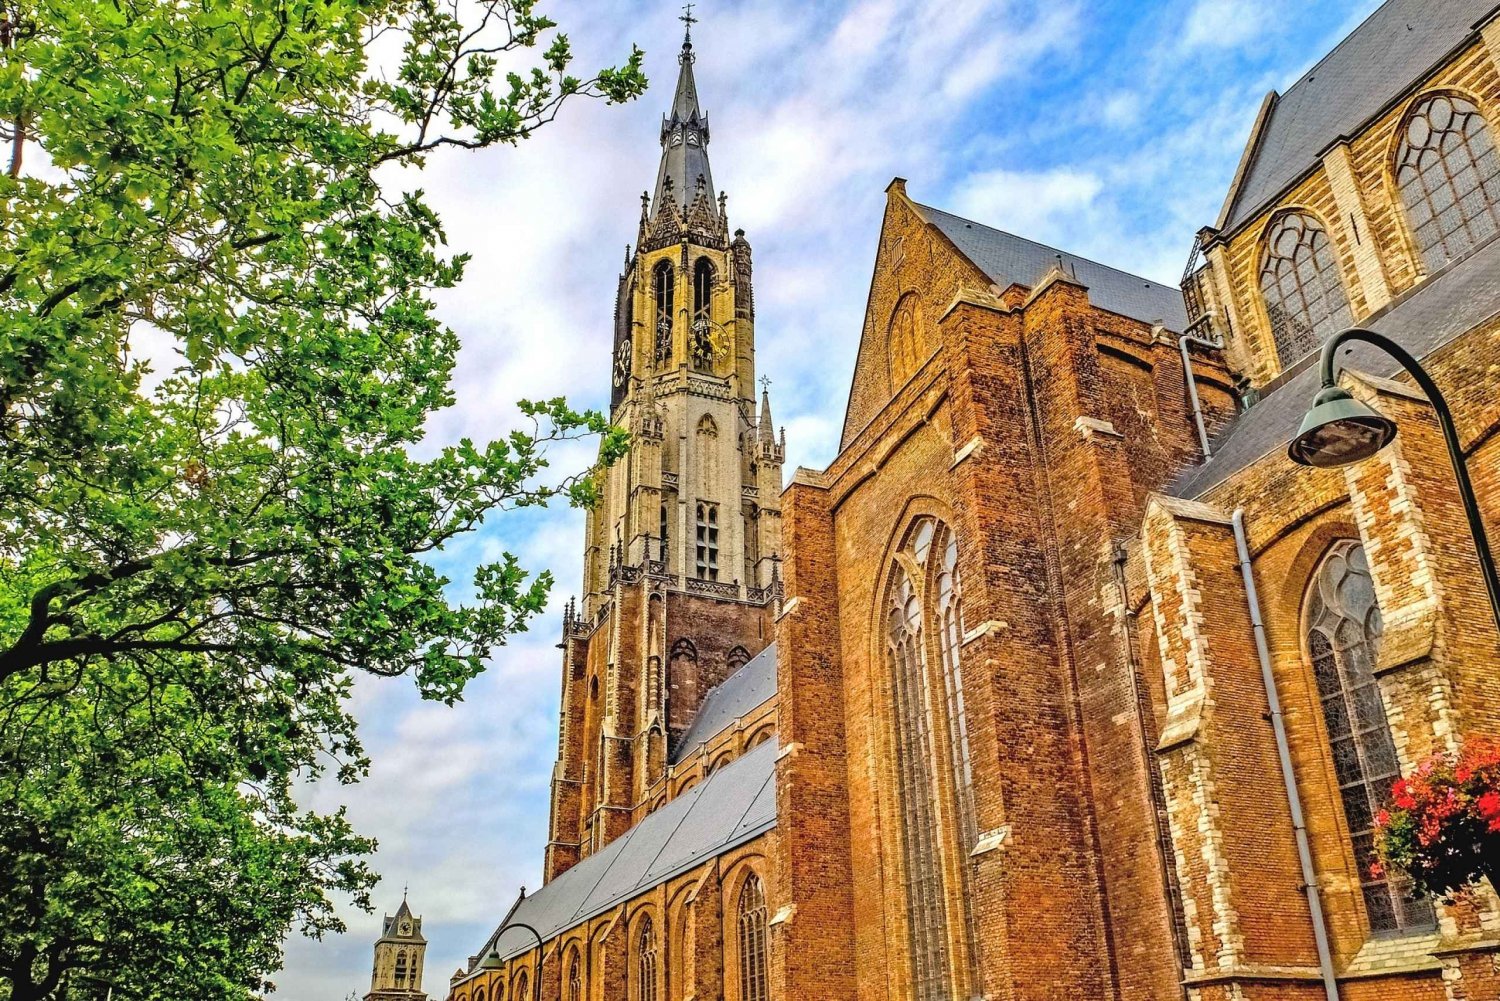 From Amsterdam: Rotterdam, Delft, The Hague and 1 Attraction